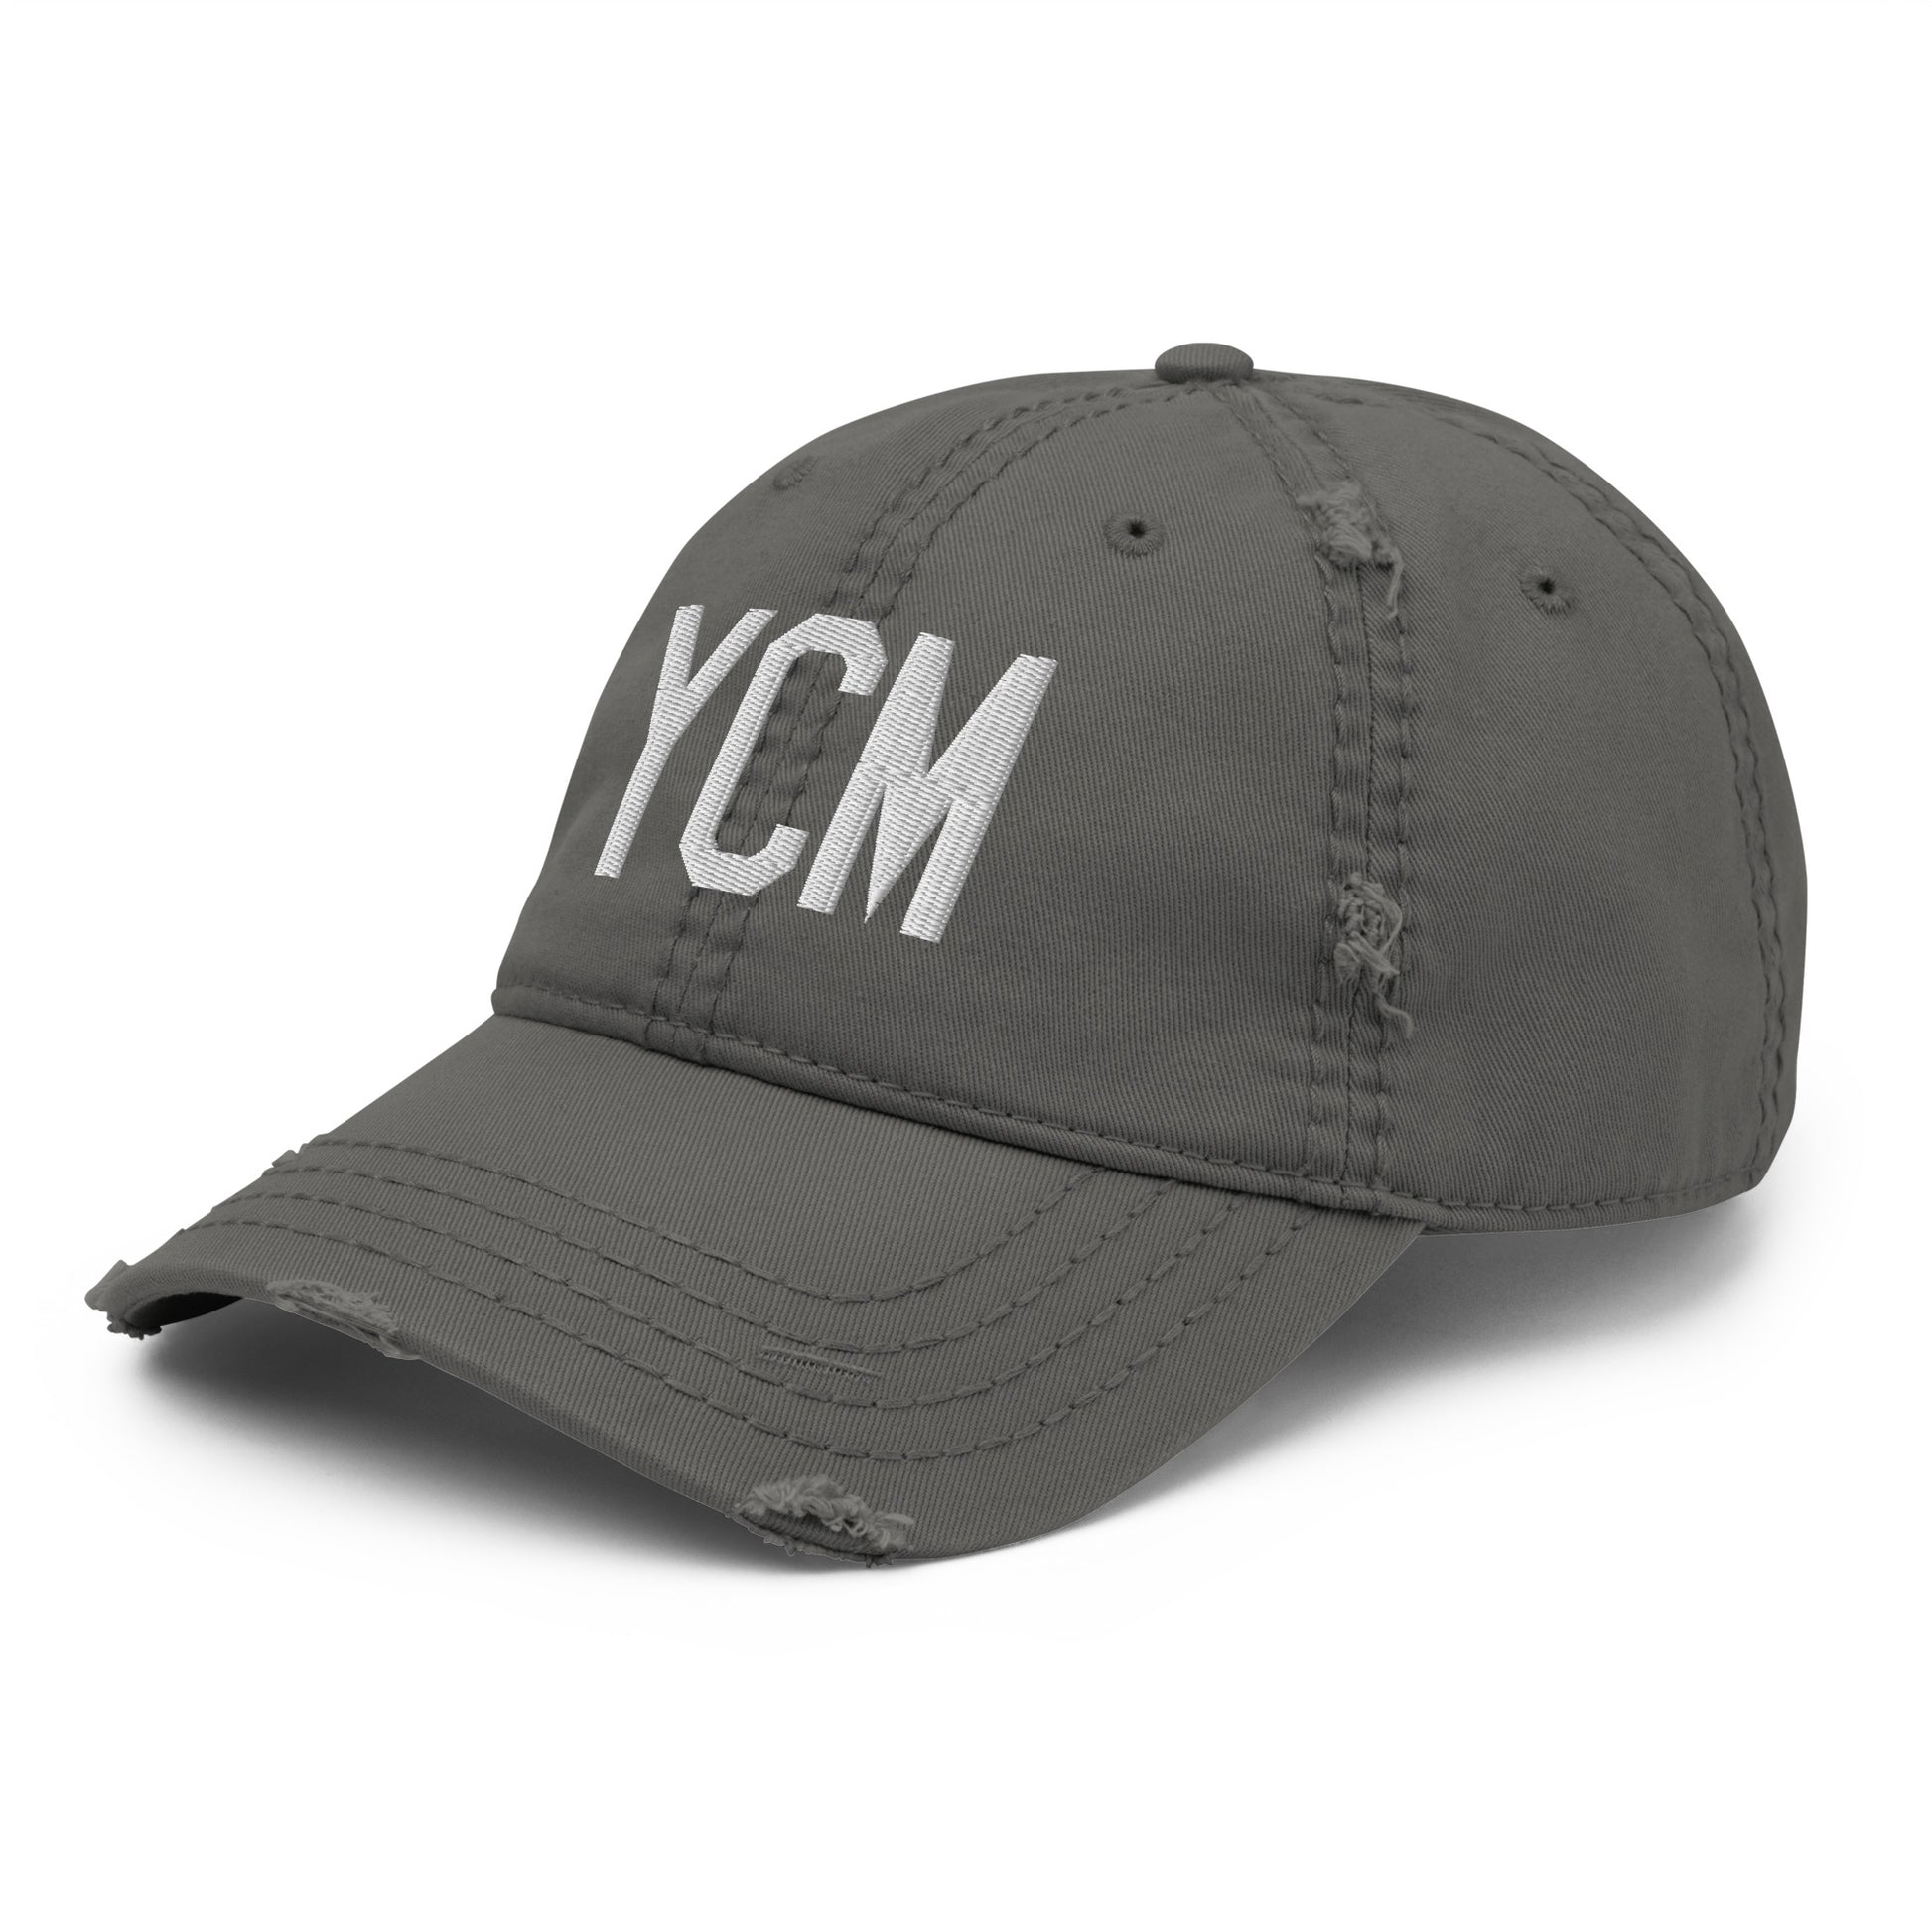 Airport Code Distressed Hat - White • YCM St. Catharines • YHM Designs - Image 16